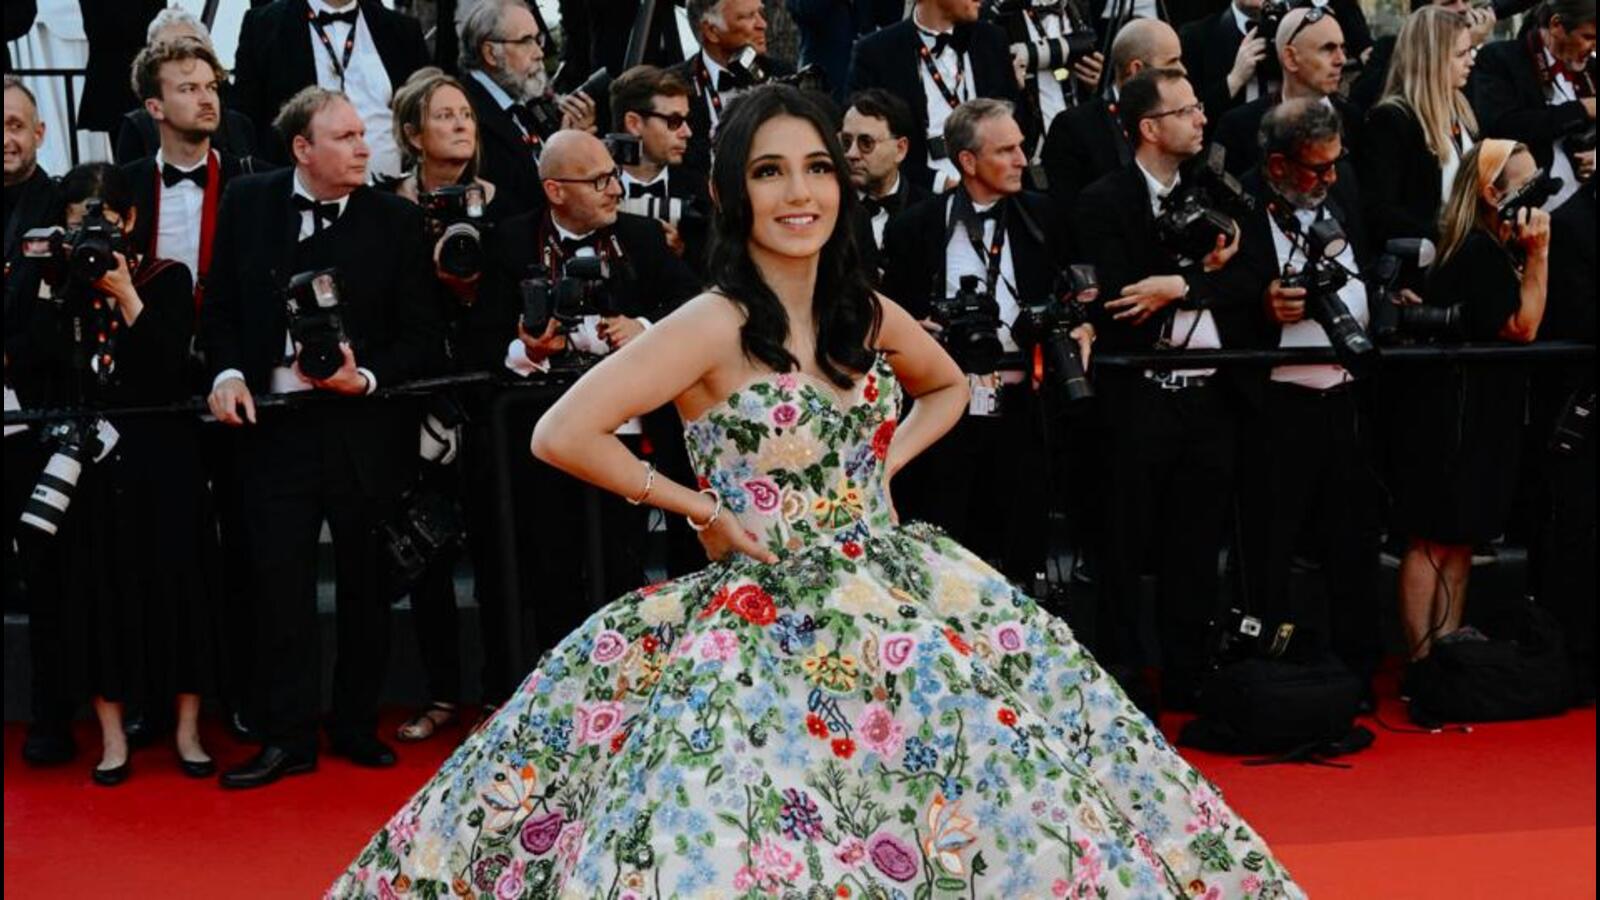 Masoom Minawala: Fashion has been synonymous to Cannes since the beginning